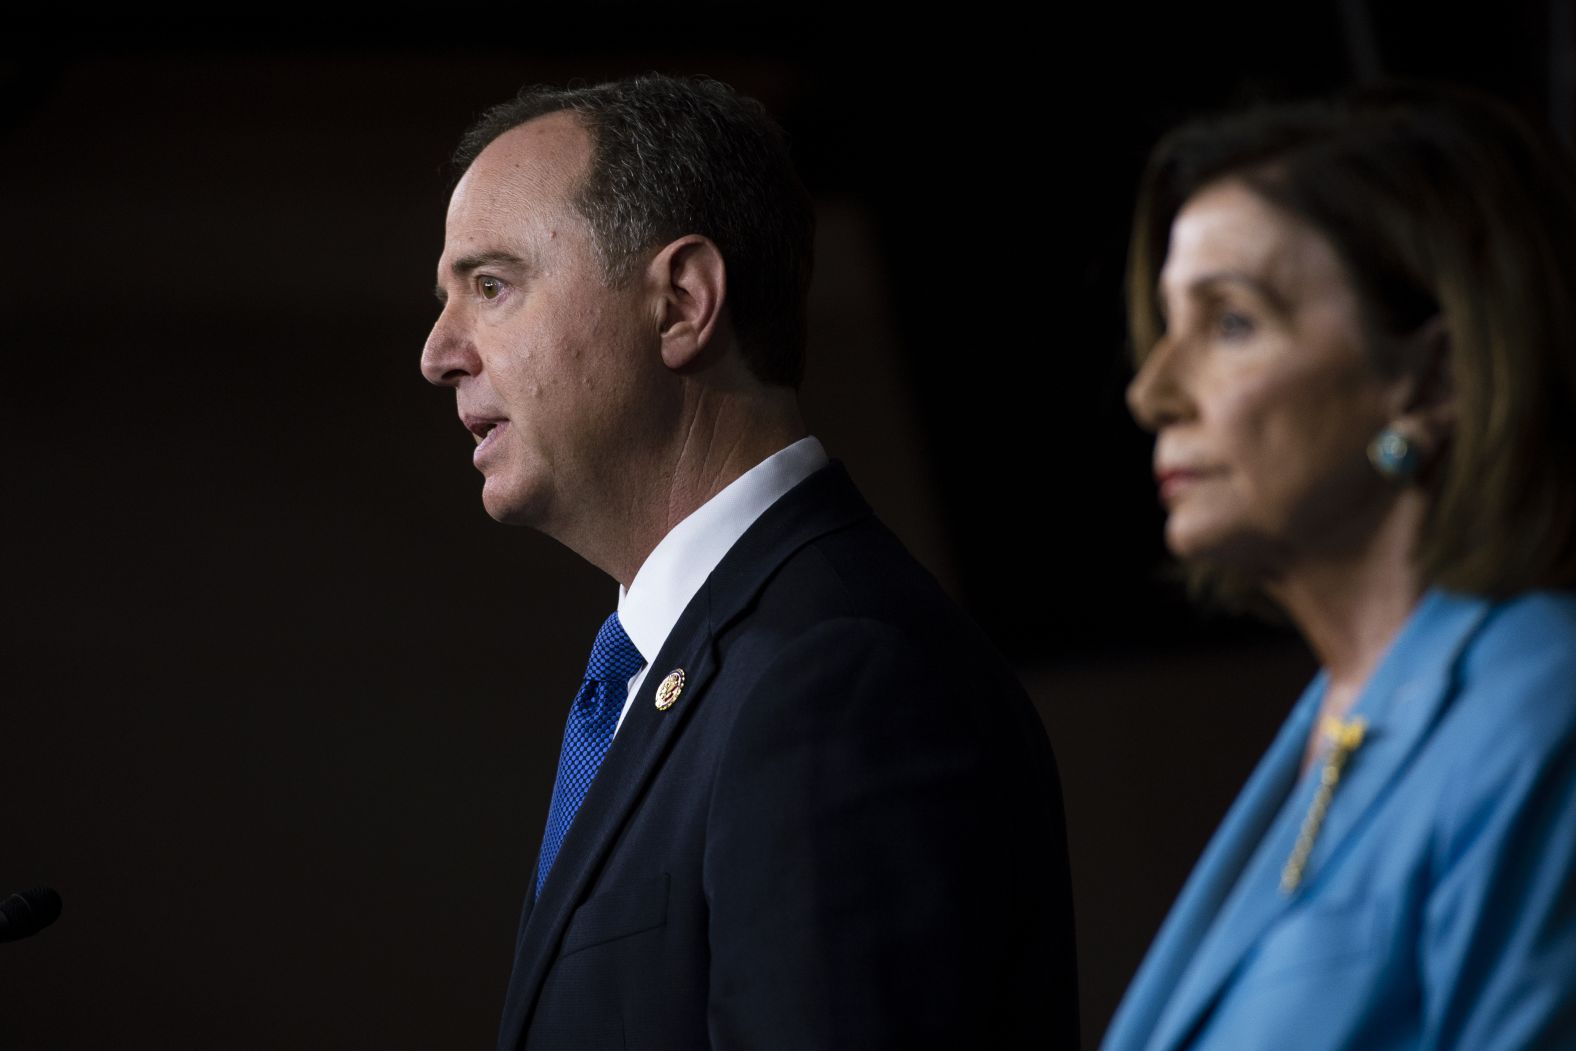 Schiff and Pelosi attend their news conference on October 2. Pelosi said the impeachment inquiry <a href="https://www.cnn.com/politics/live-news/trump-impeachment-inquiry-10-02-2019/h_c846ab6b42ba56cd77ea55d32bd60d6e" target="_blank">is "not anything to be joyful about"</a> and called this a "sad time for the American people." She said that the House had "no choice but to go forward" with the proceedings.